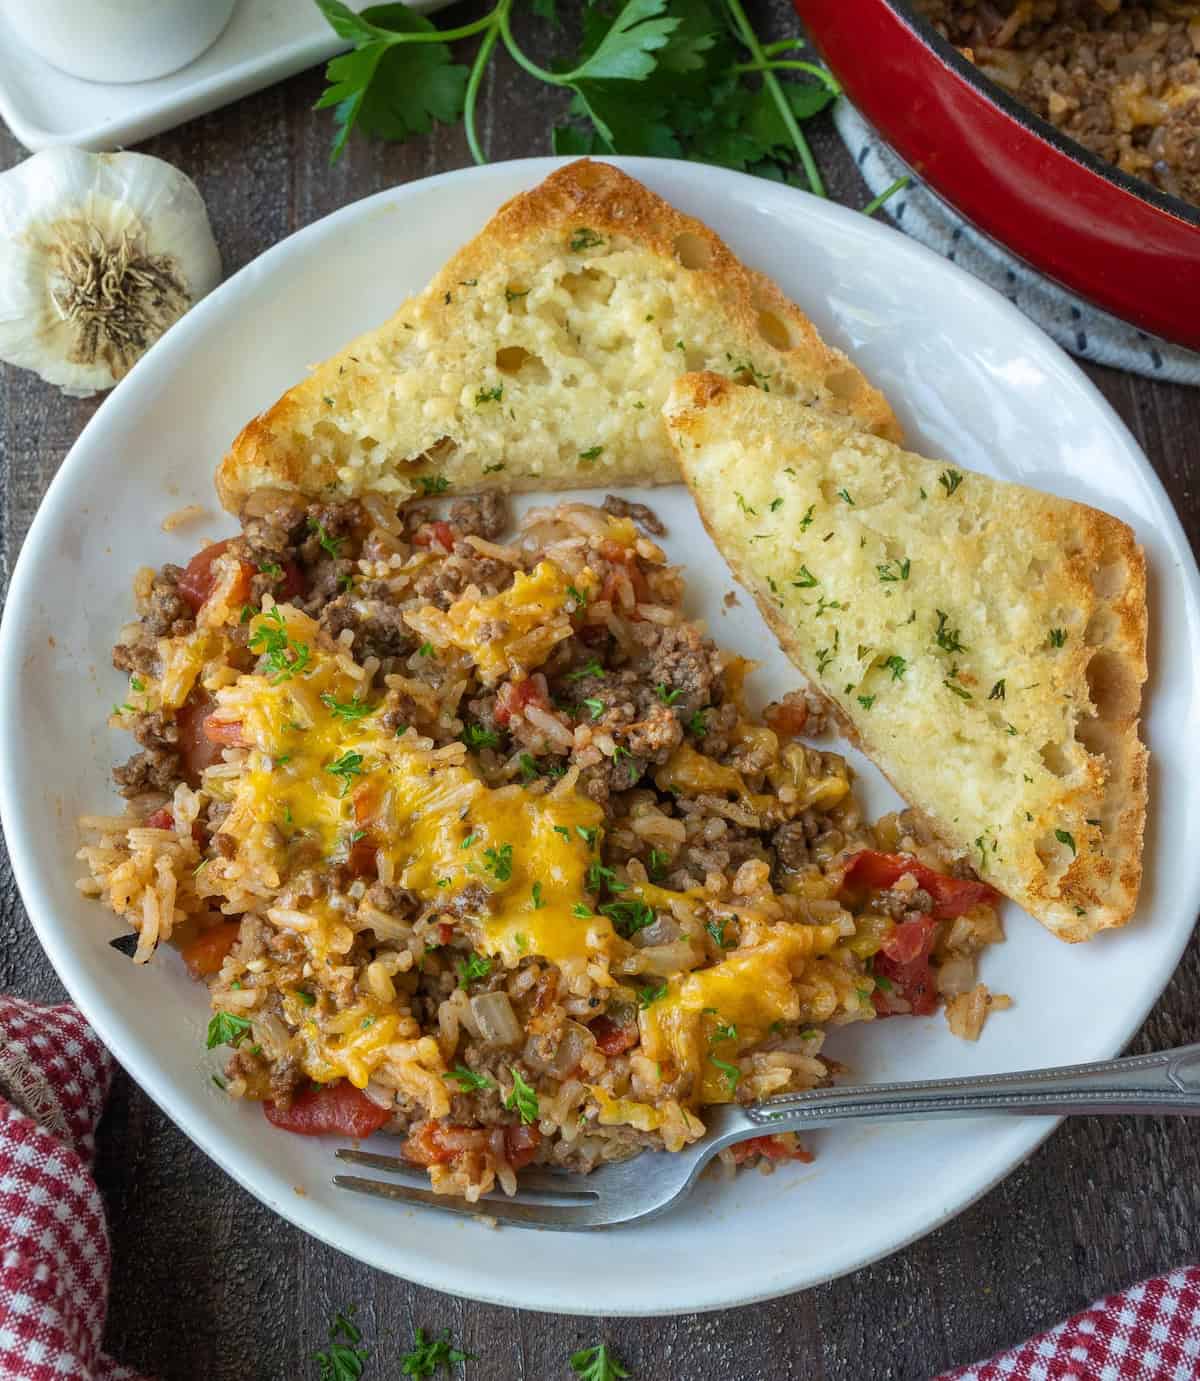 Ground beef and rice on a plate with garlic bread.